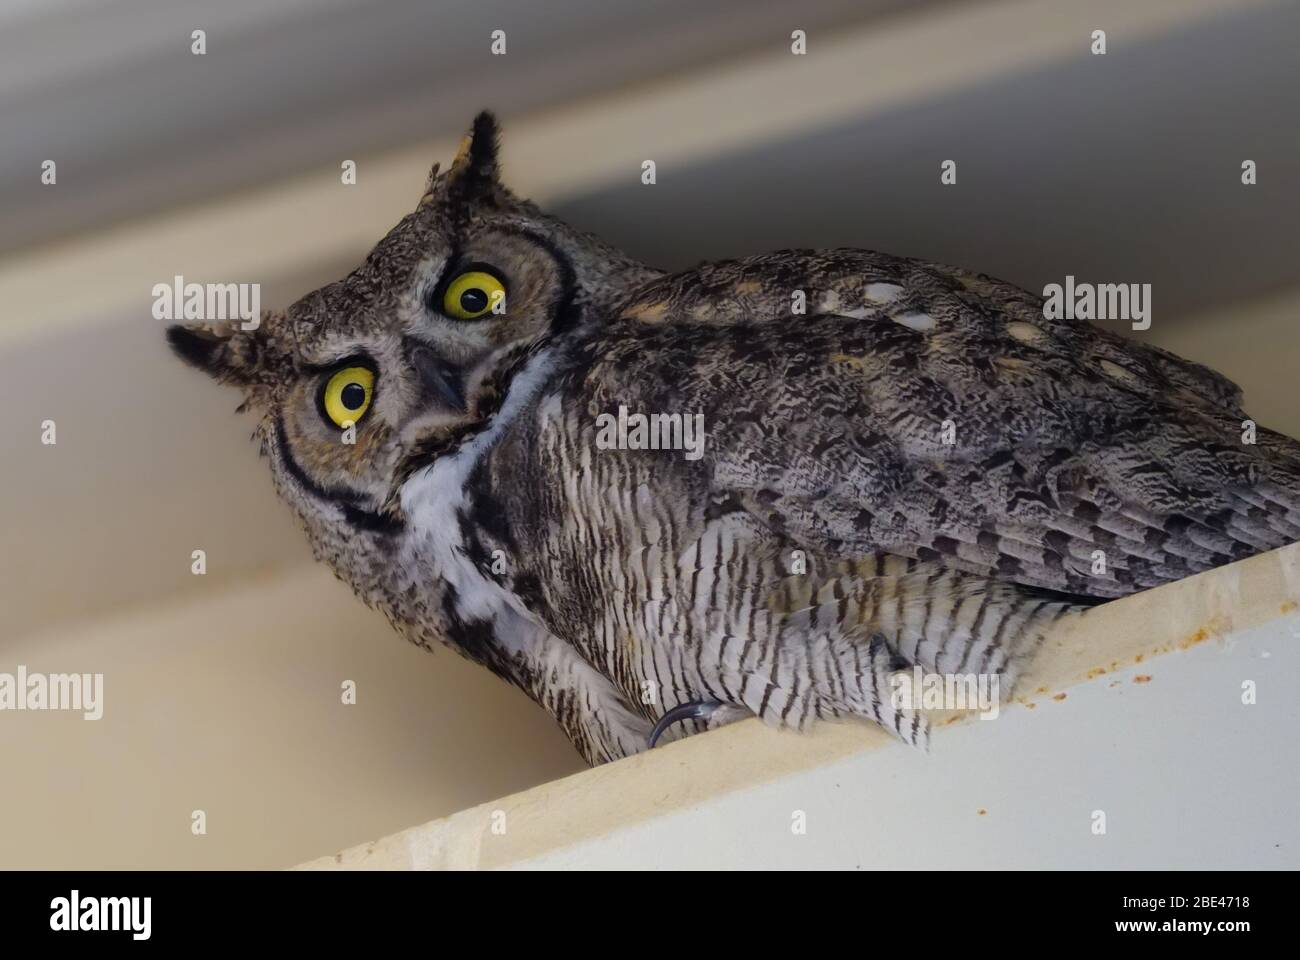 A female Great Horned Owl perched in the rafters looks straight at the camera. Stock Photo